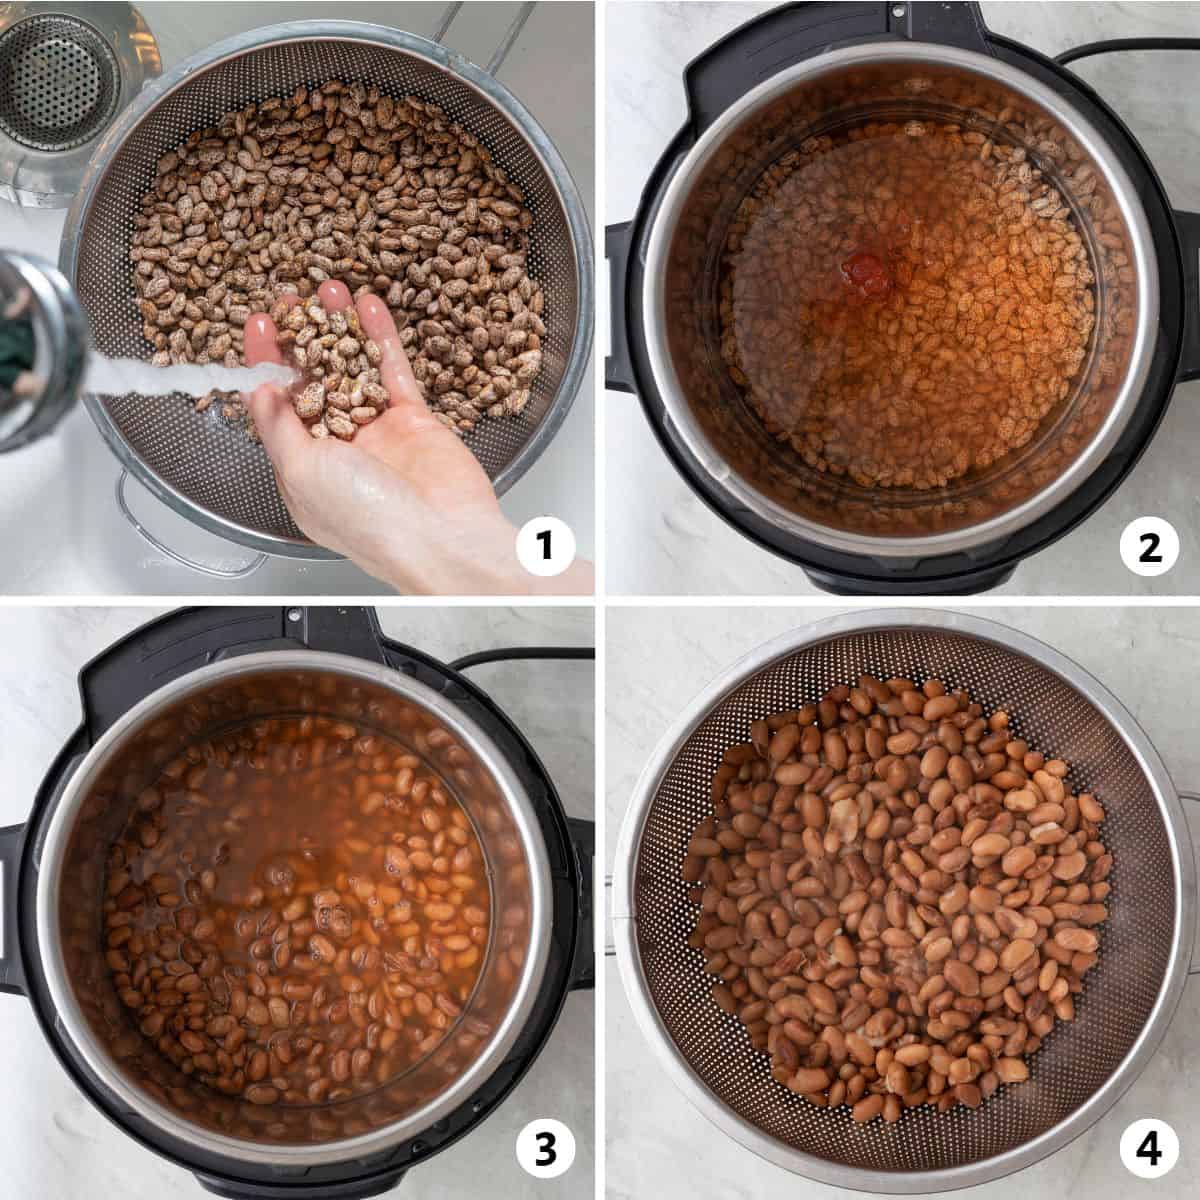 4 image collage making recipe: 1- rinsing beans in a colander, 2- pinto beans in an instant pot with seasoning and water before cooking, 3- beans after cooking, 4- cooked beans in colander draining liquid.